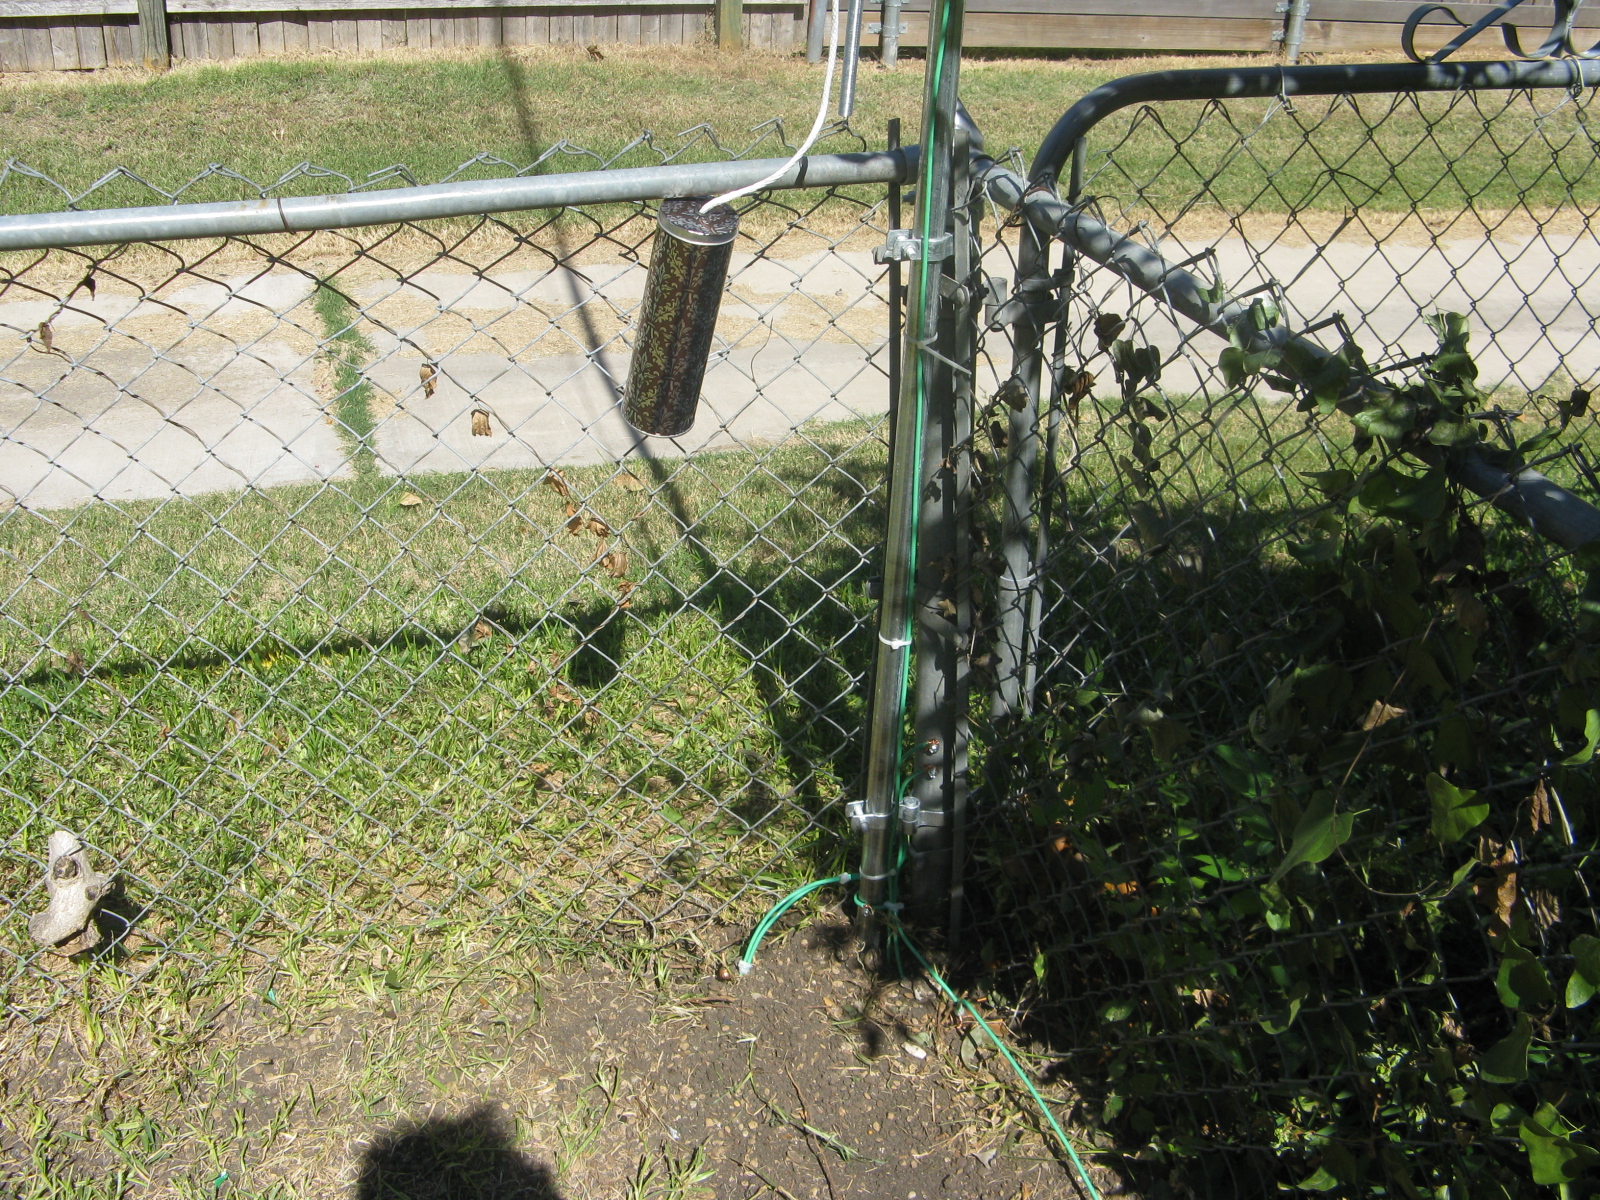 Antenna pole and grounds at back of yard